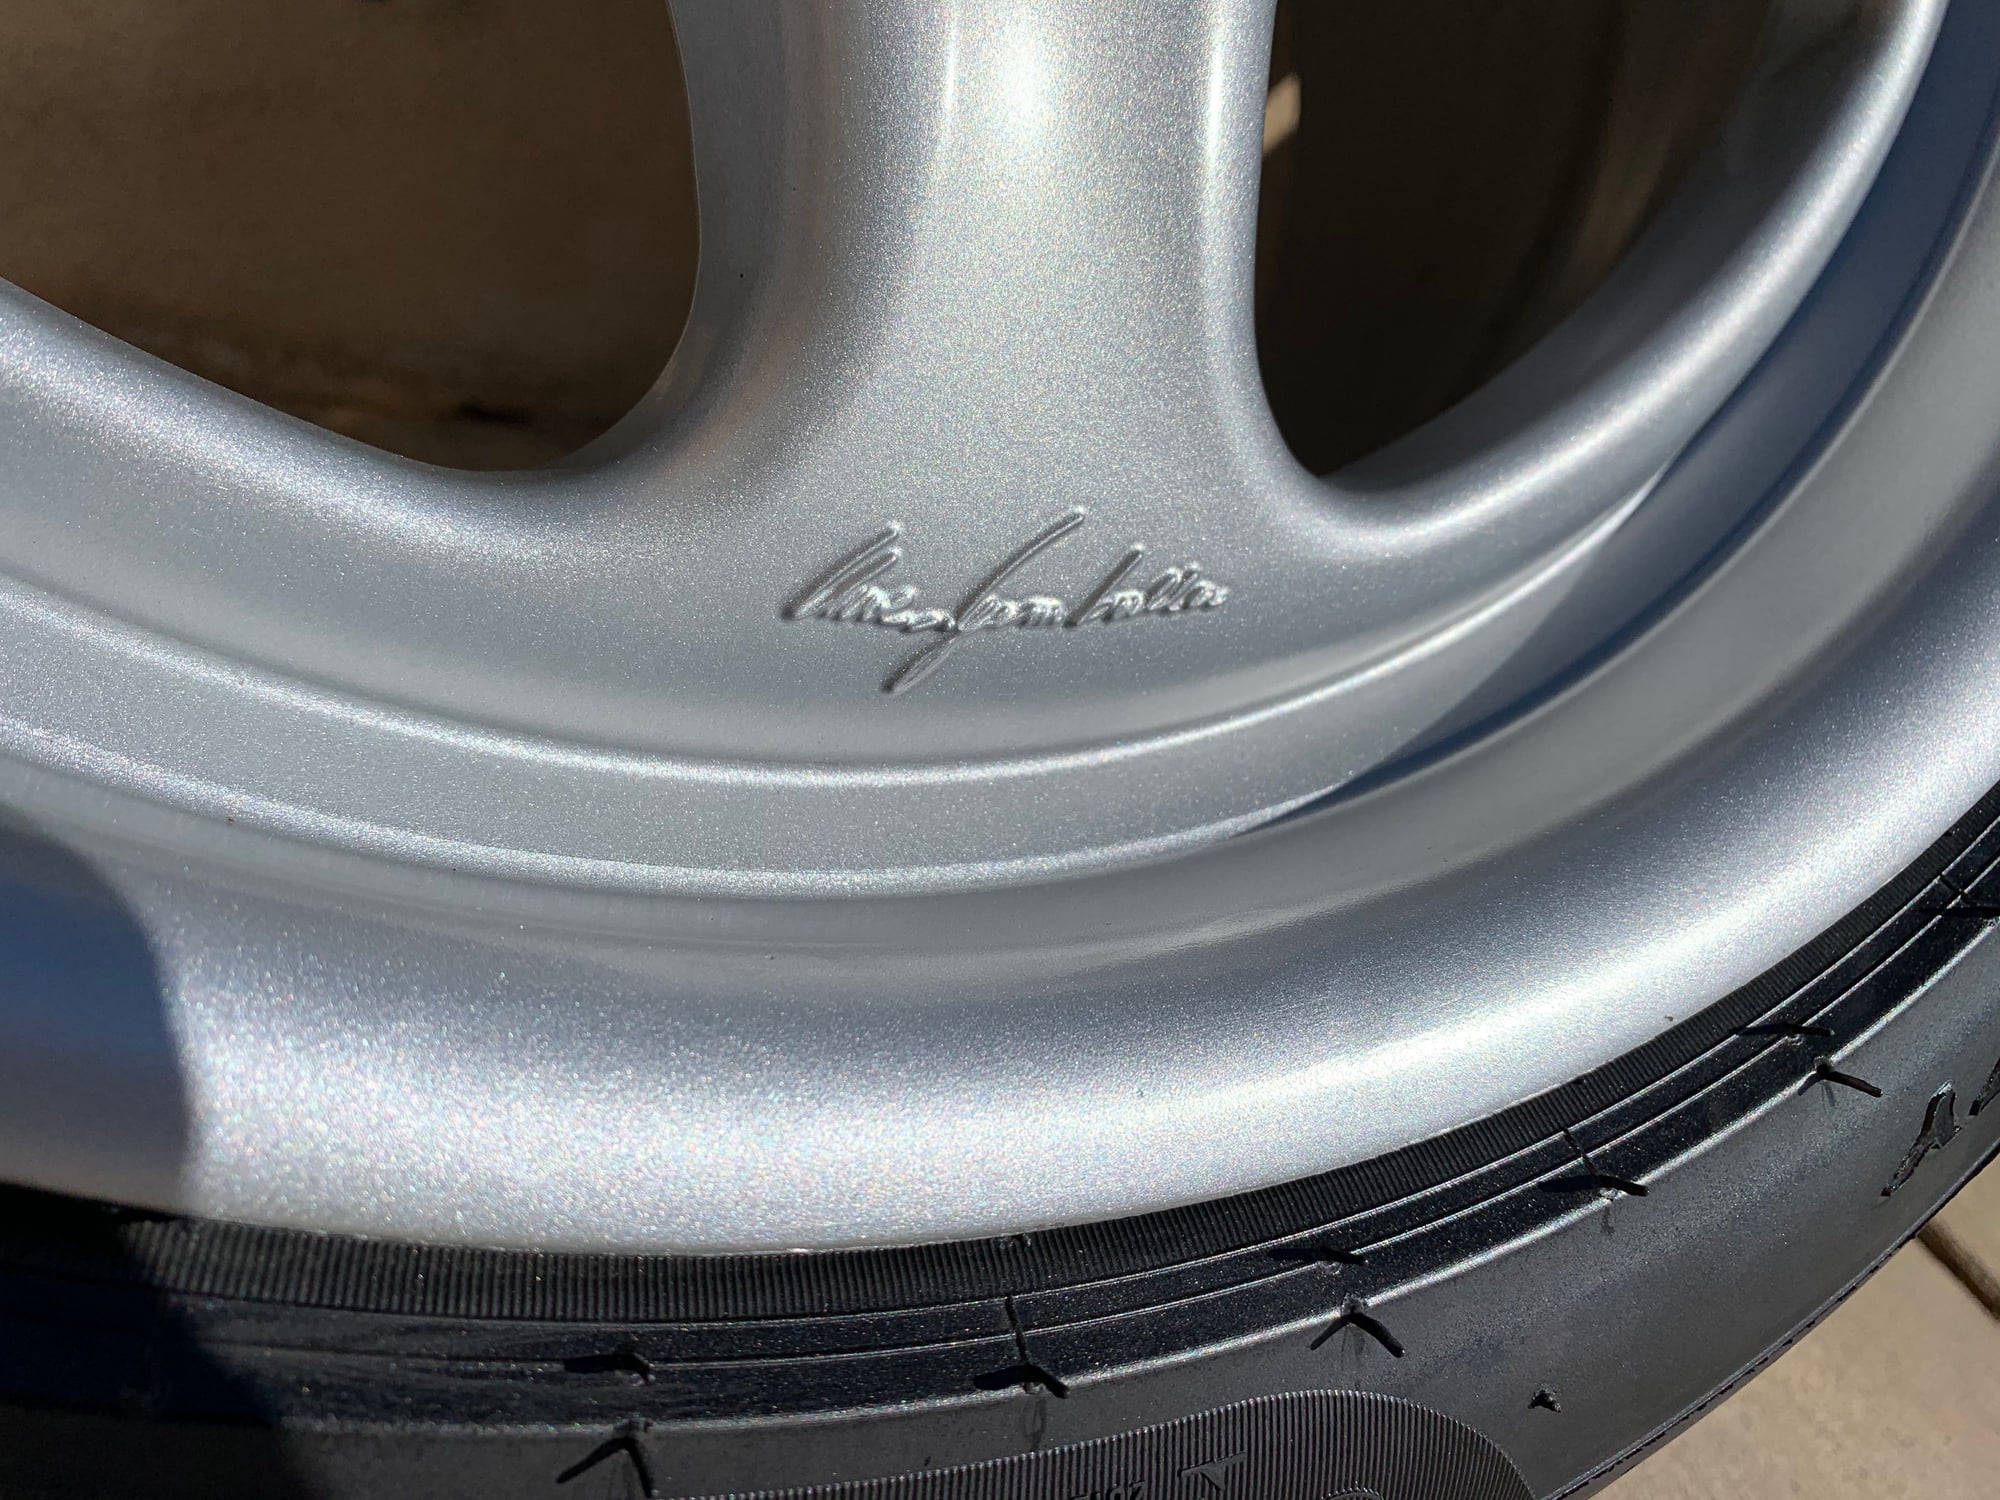 Wheels and Tires/Axles - Rare Gemballa Lemans Wheels & Tires - Used - All Years Porsche All Models - Santa Clarita, CA 91390, United States